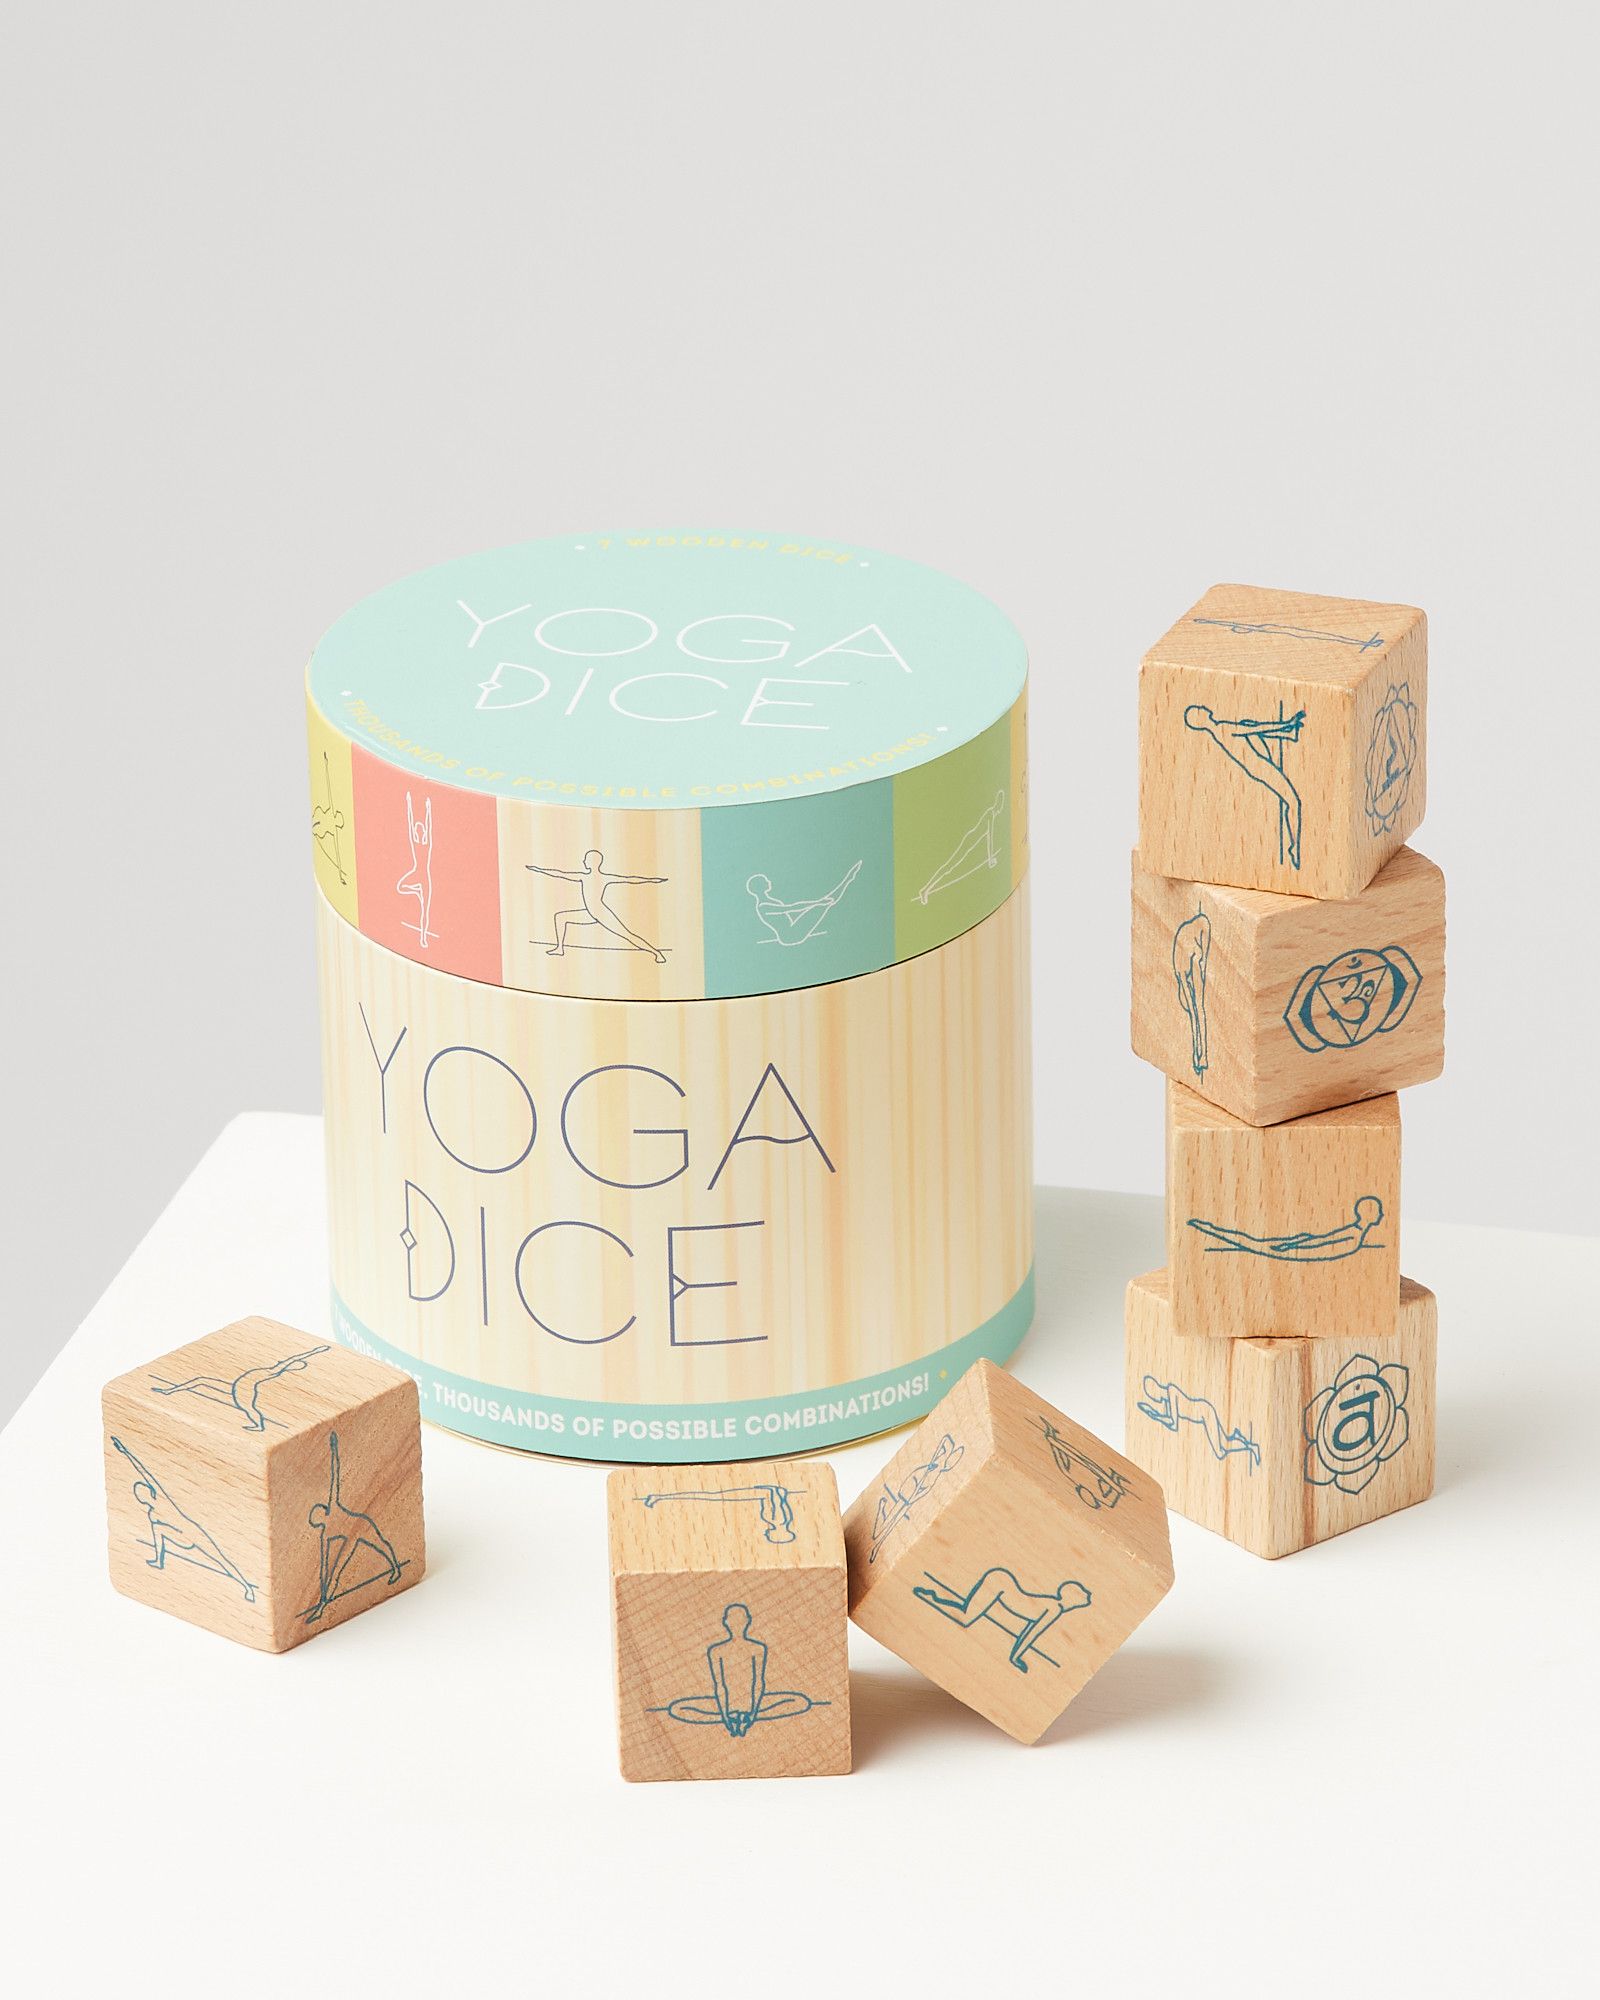 Yoga Positions Dice Game | Oliver Bonas